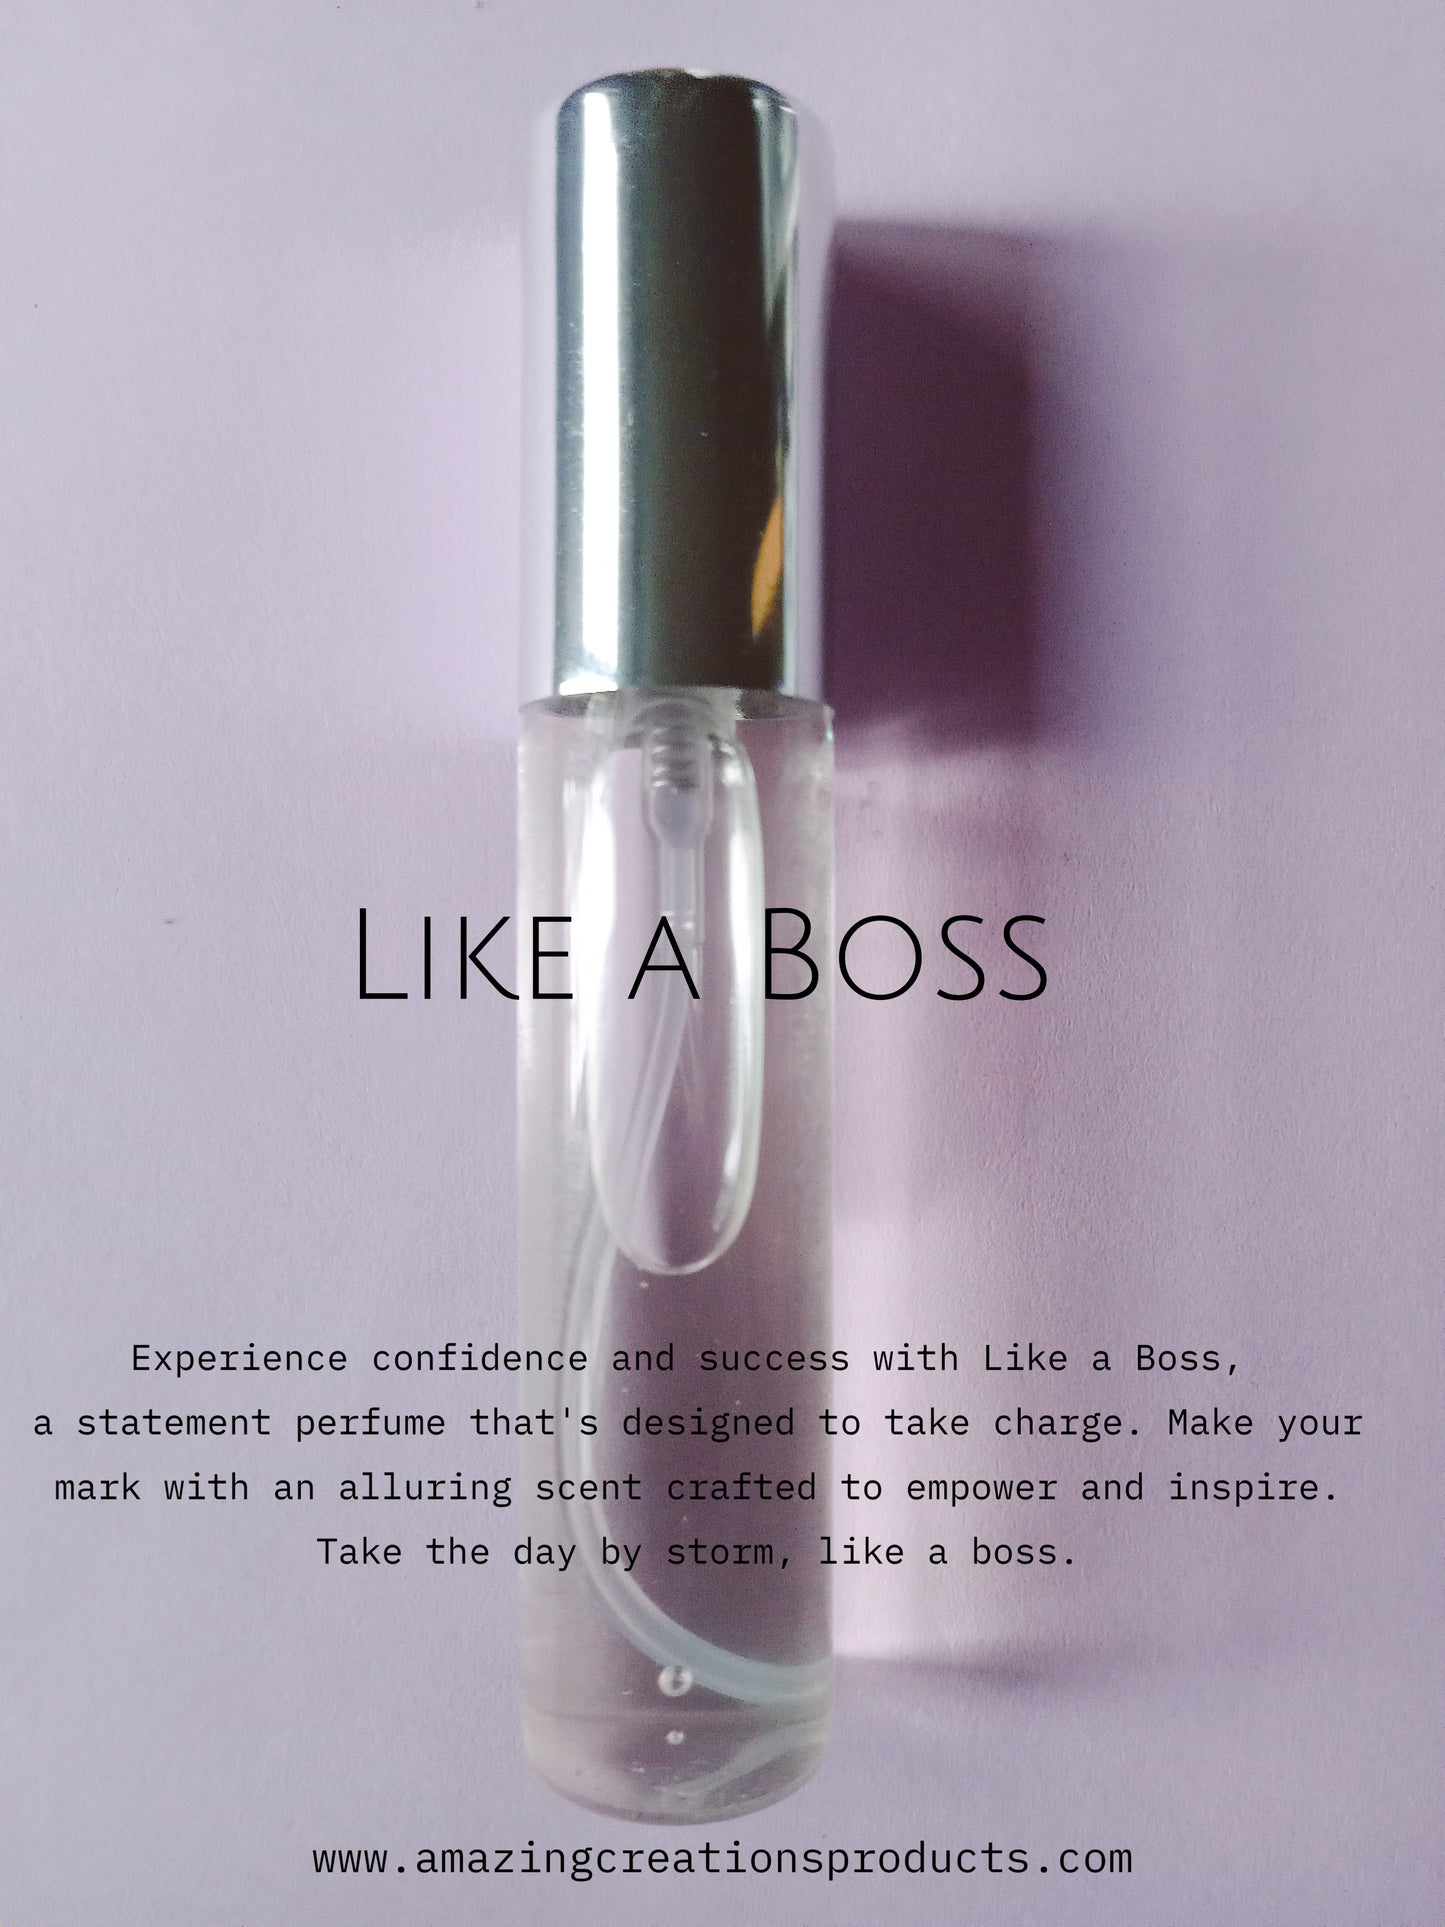  Like a Boss -  available at Amazing Creations Products . Grab yours for $12 today!